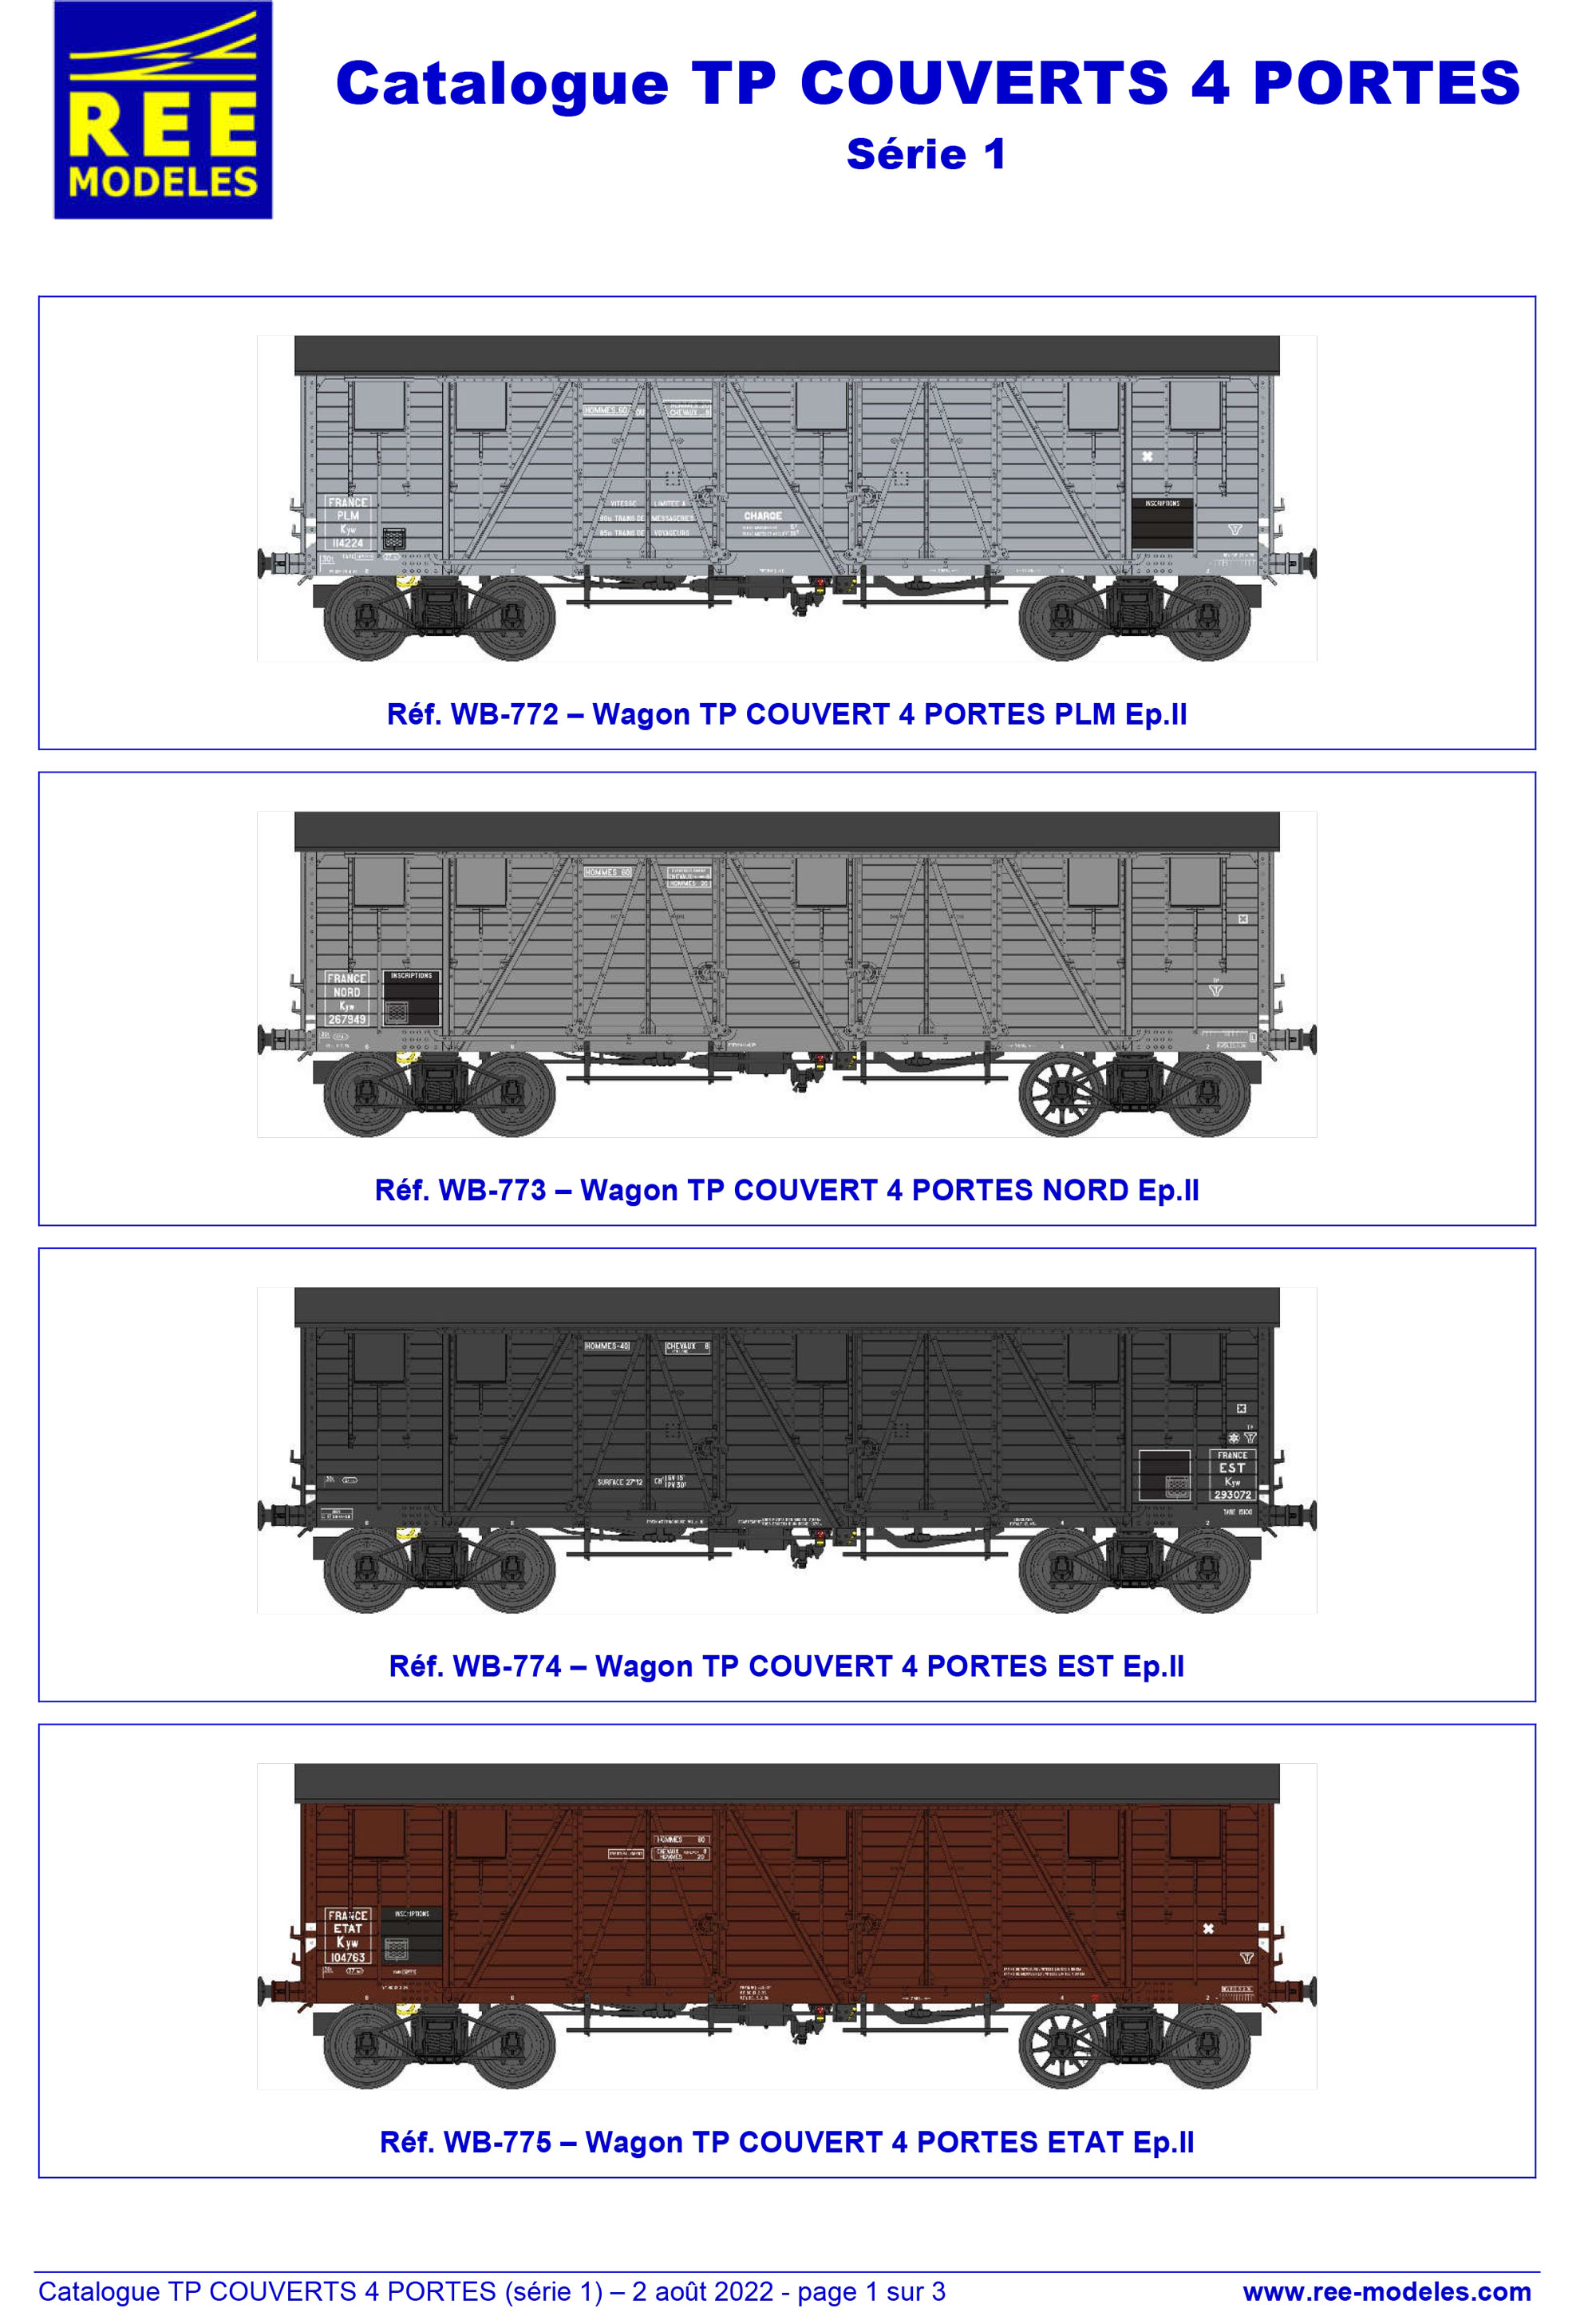 Rails Europ Express - TP covered freight wagons (1st series)